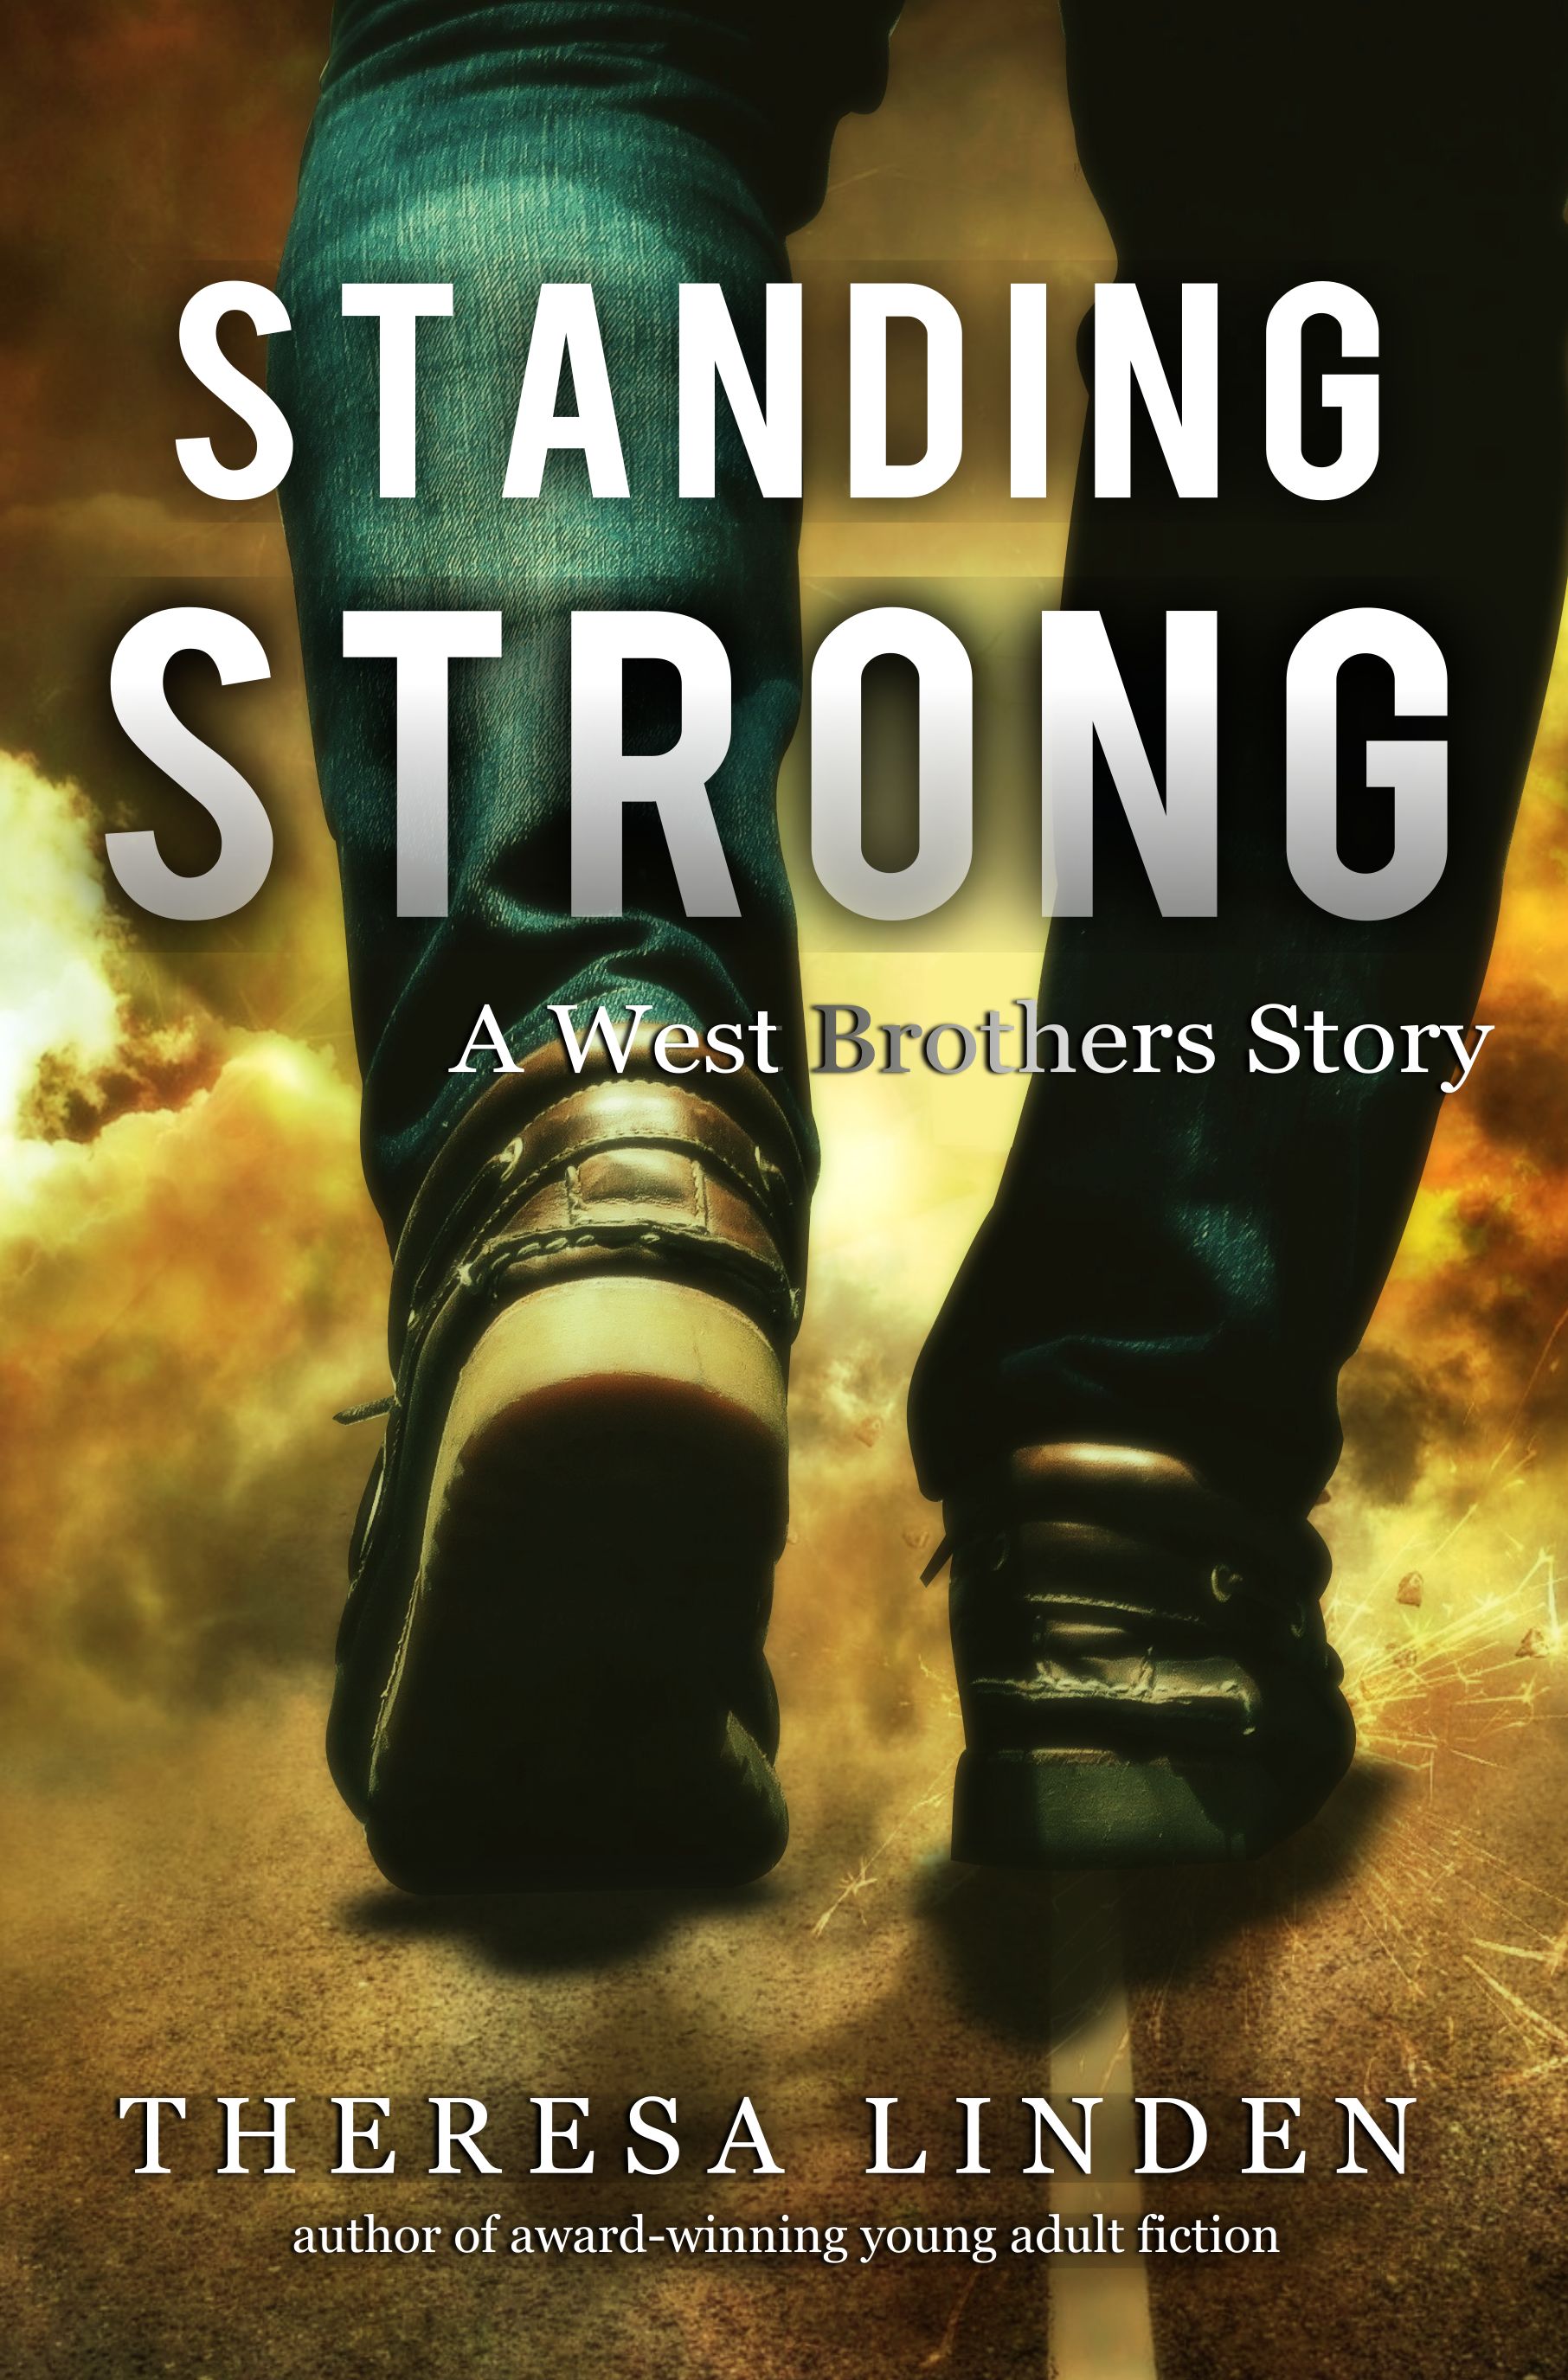 Standing strong. Westerlies brother. W brothers. Teresa strong Wilson's Touchstone stories.